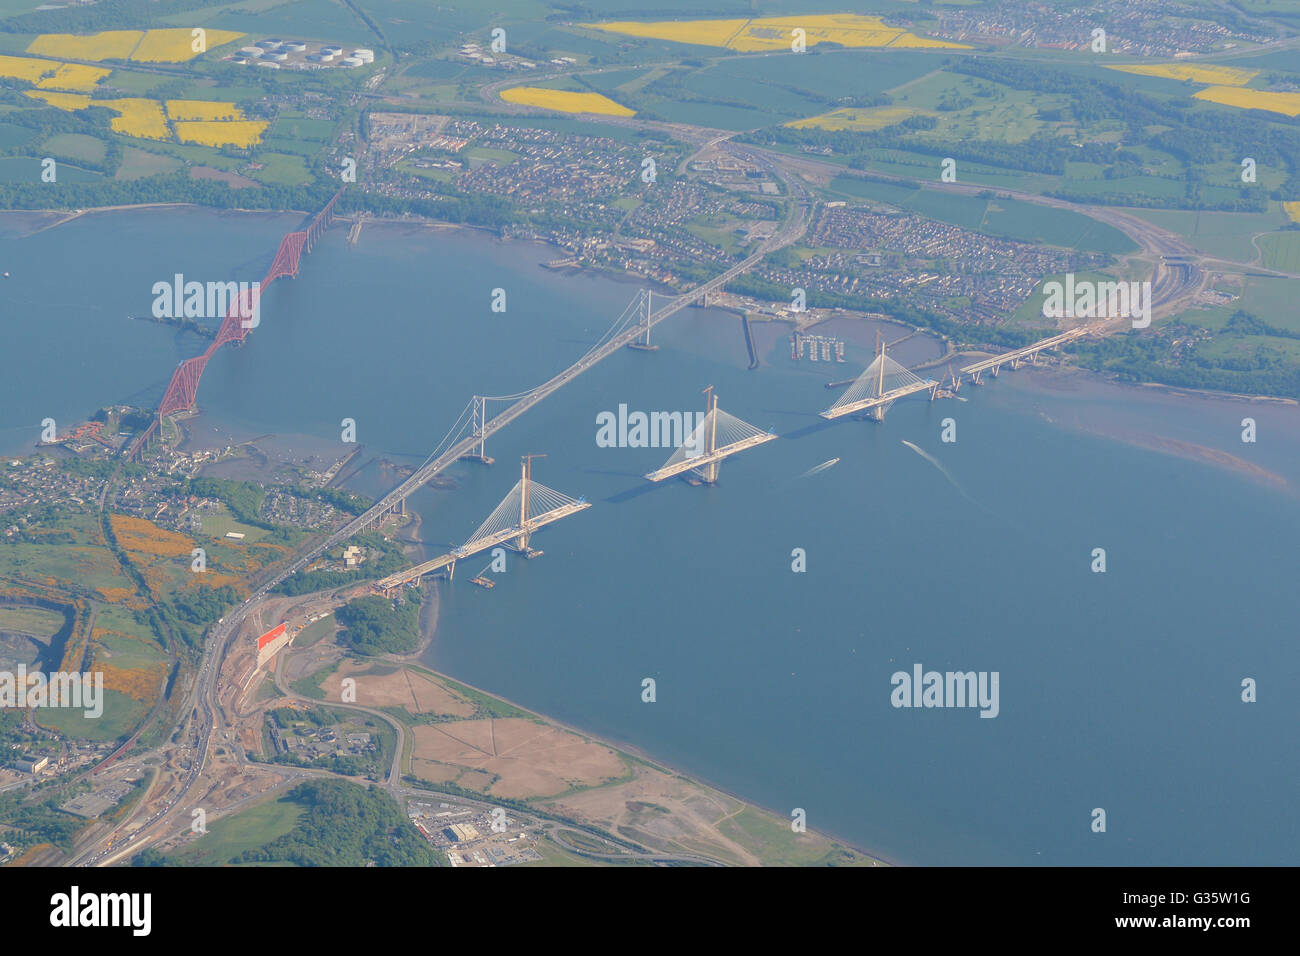 Aerial view of the Forth bridges - The Forth Bridge (rail), Forth Road Bridge and Queensferry Crossing in course of construction Stock Photo